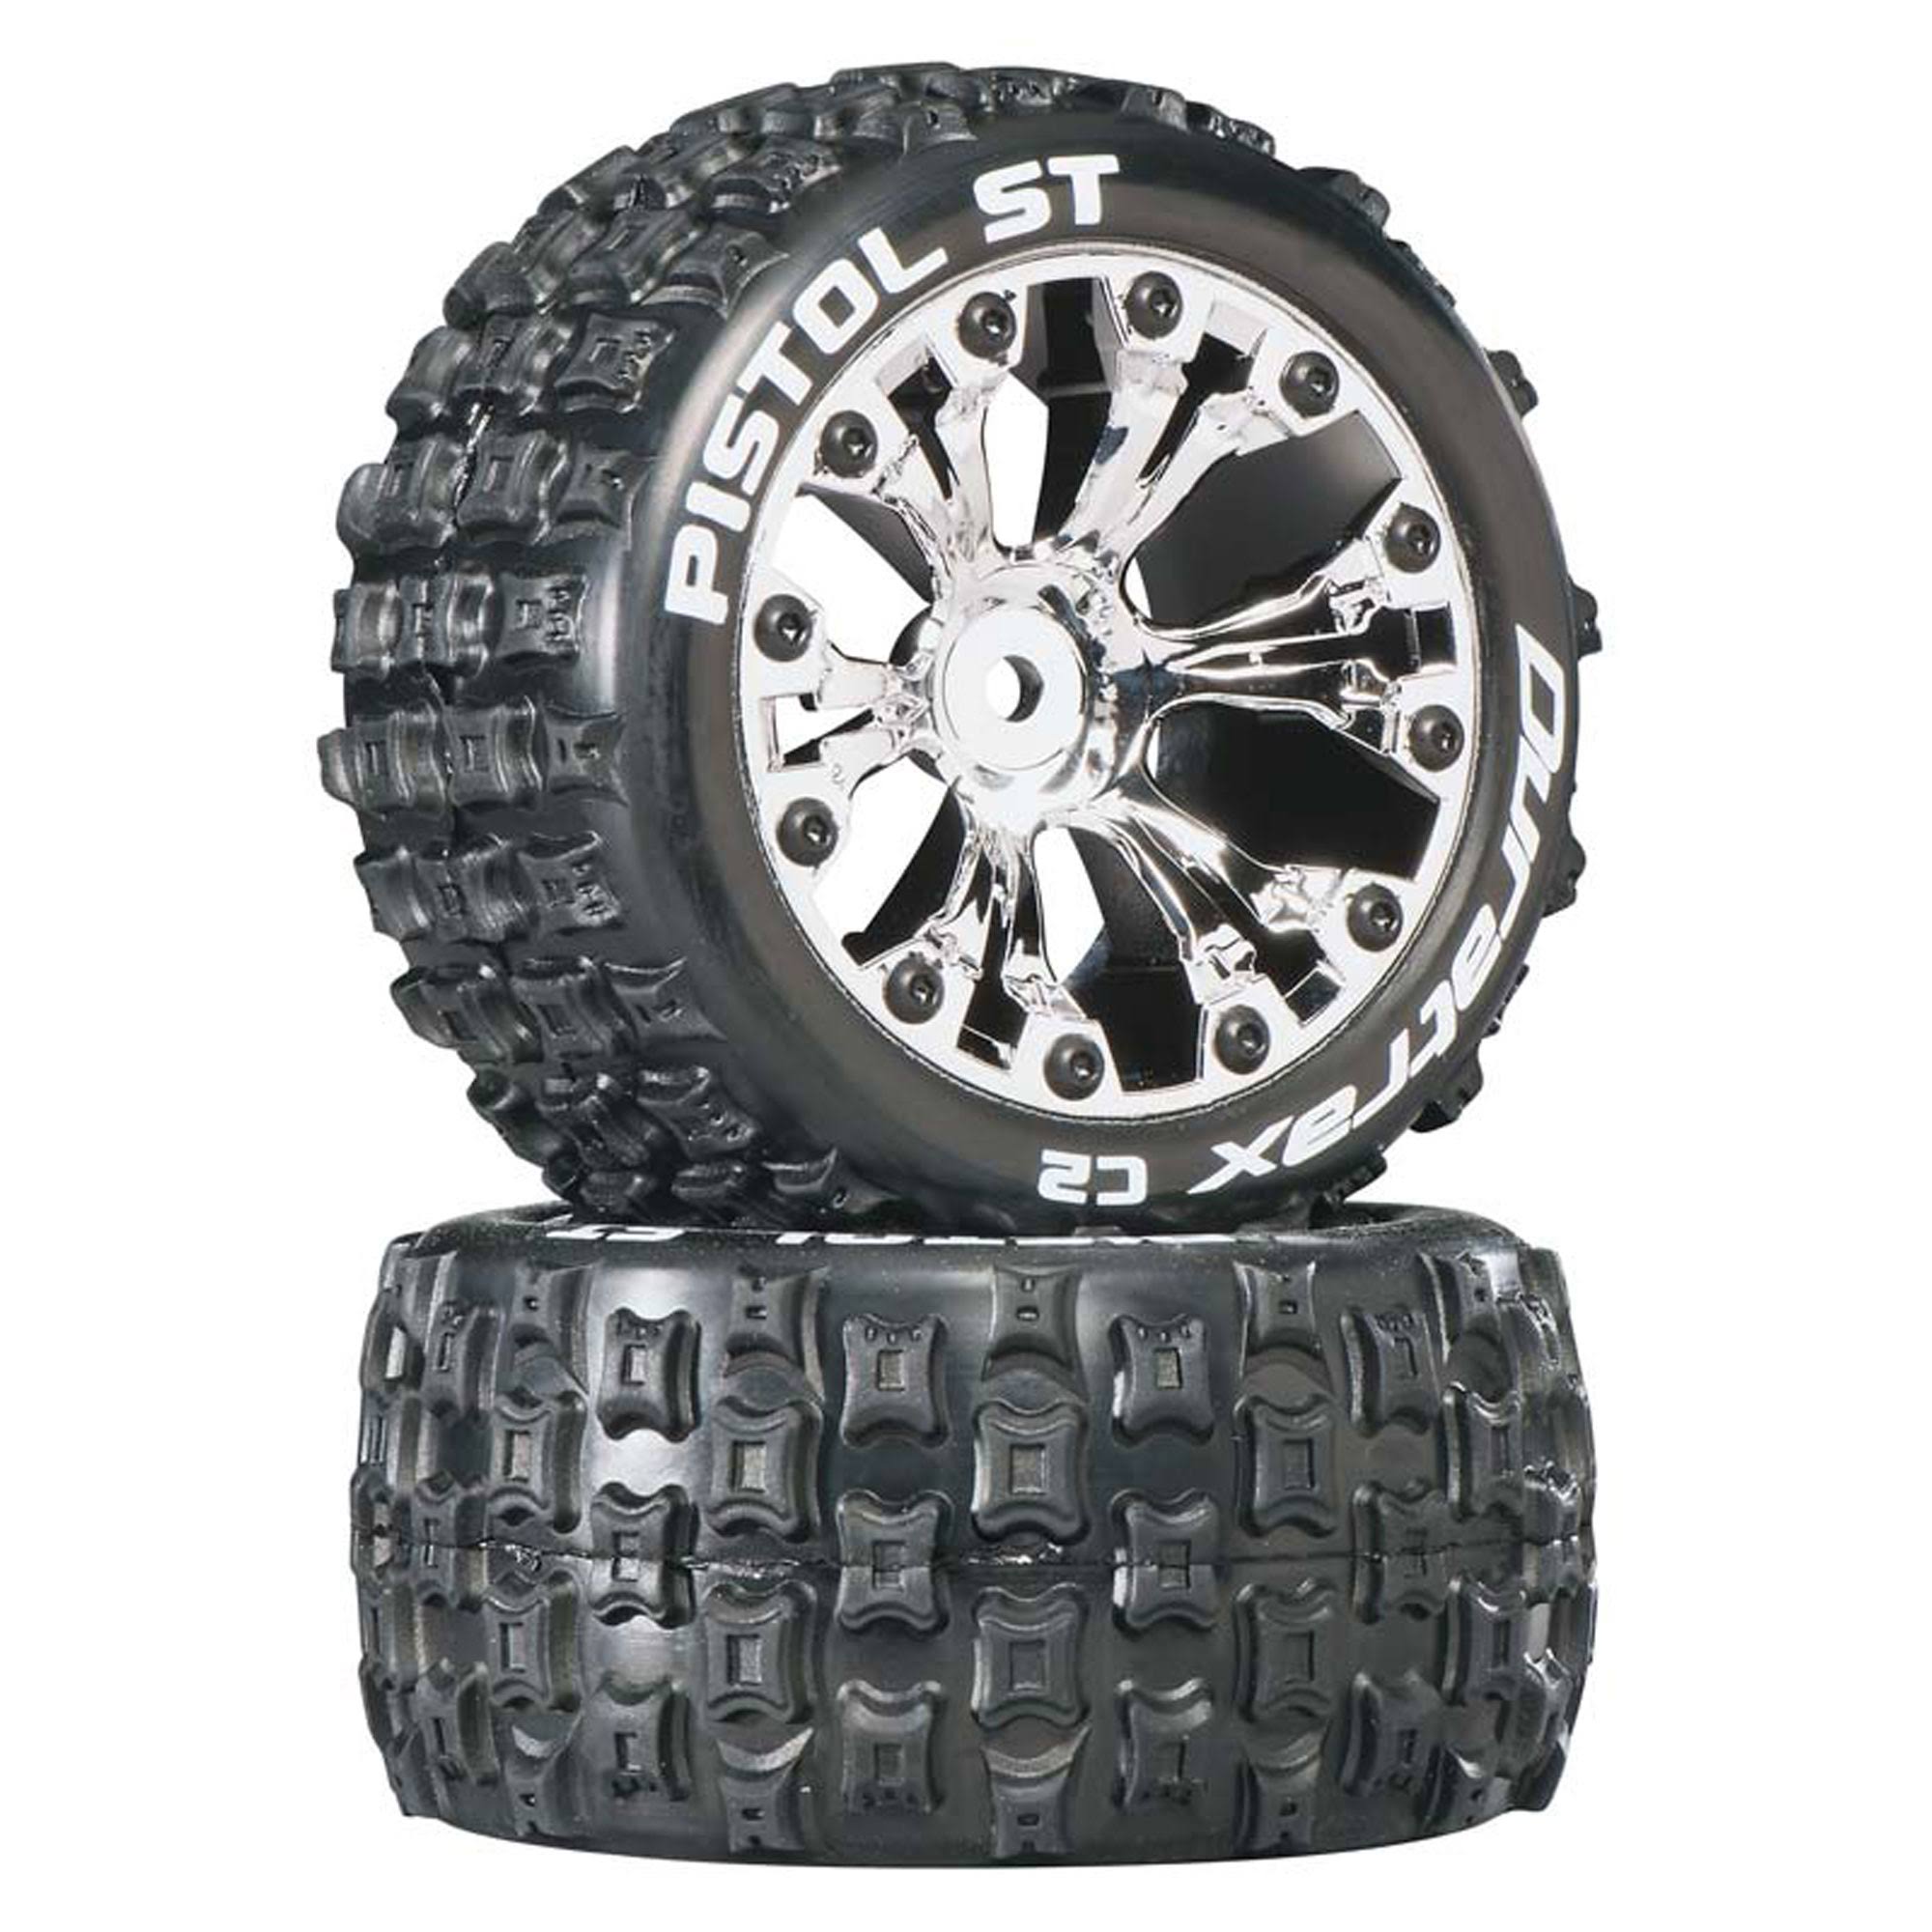 Duratrax DTXC3555 Pistol ST 2WD Mounted Rear C2 Tires - Chrome, 2.8in, 2-Pack